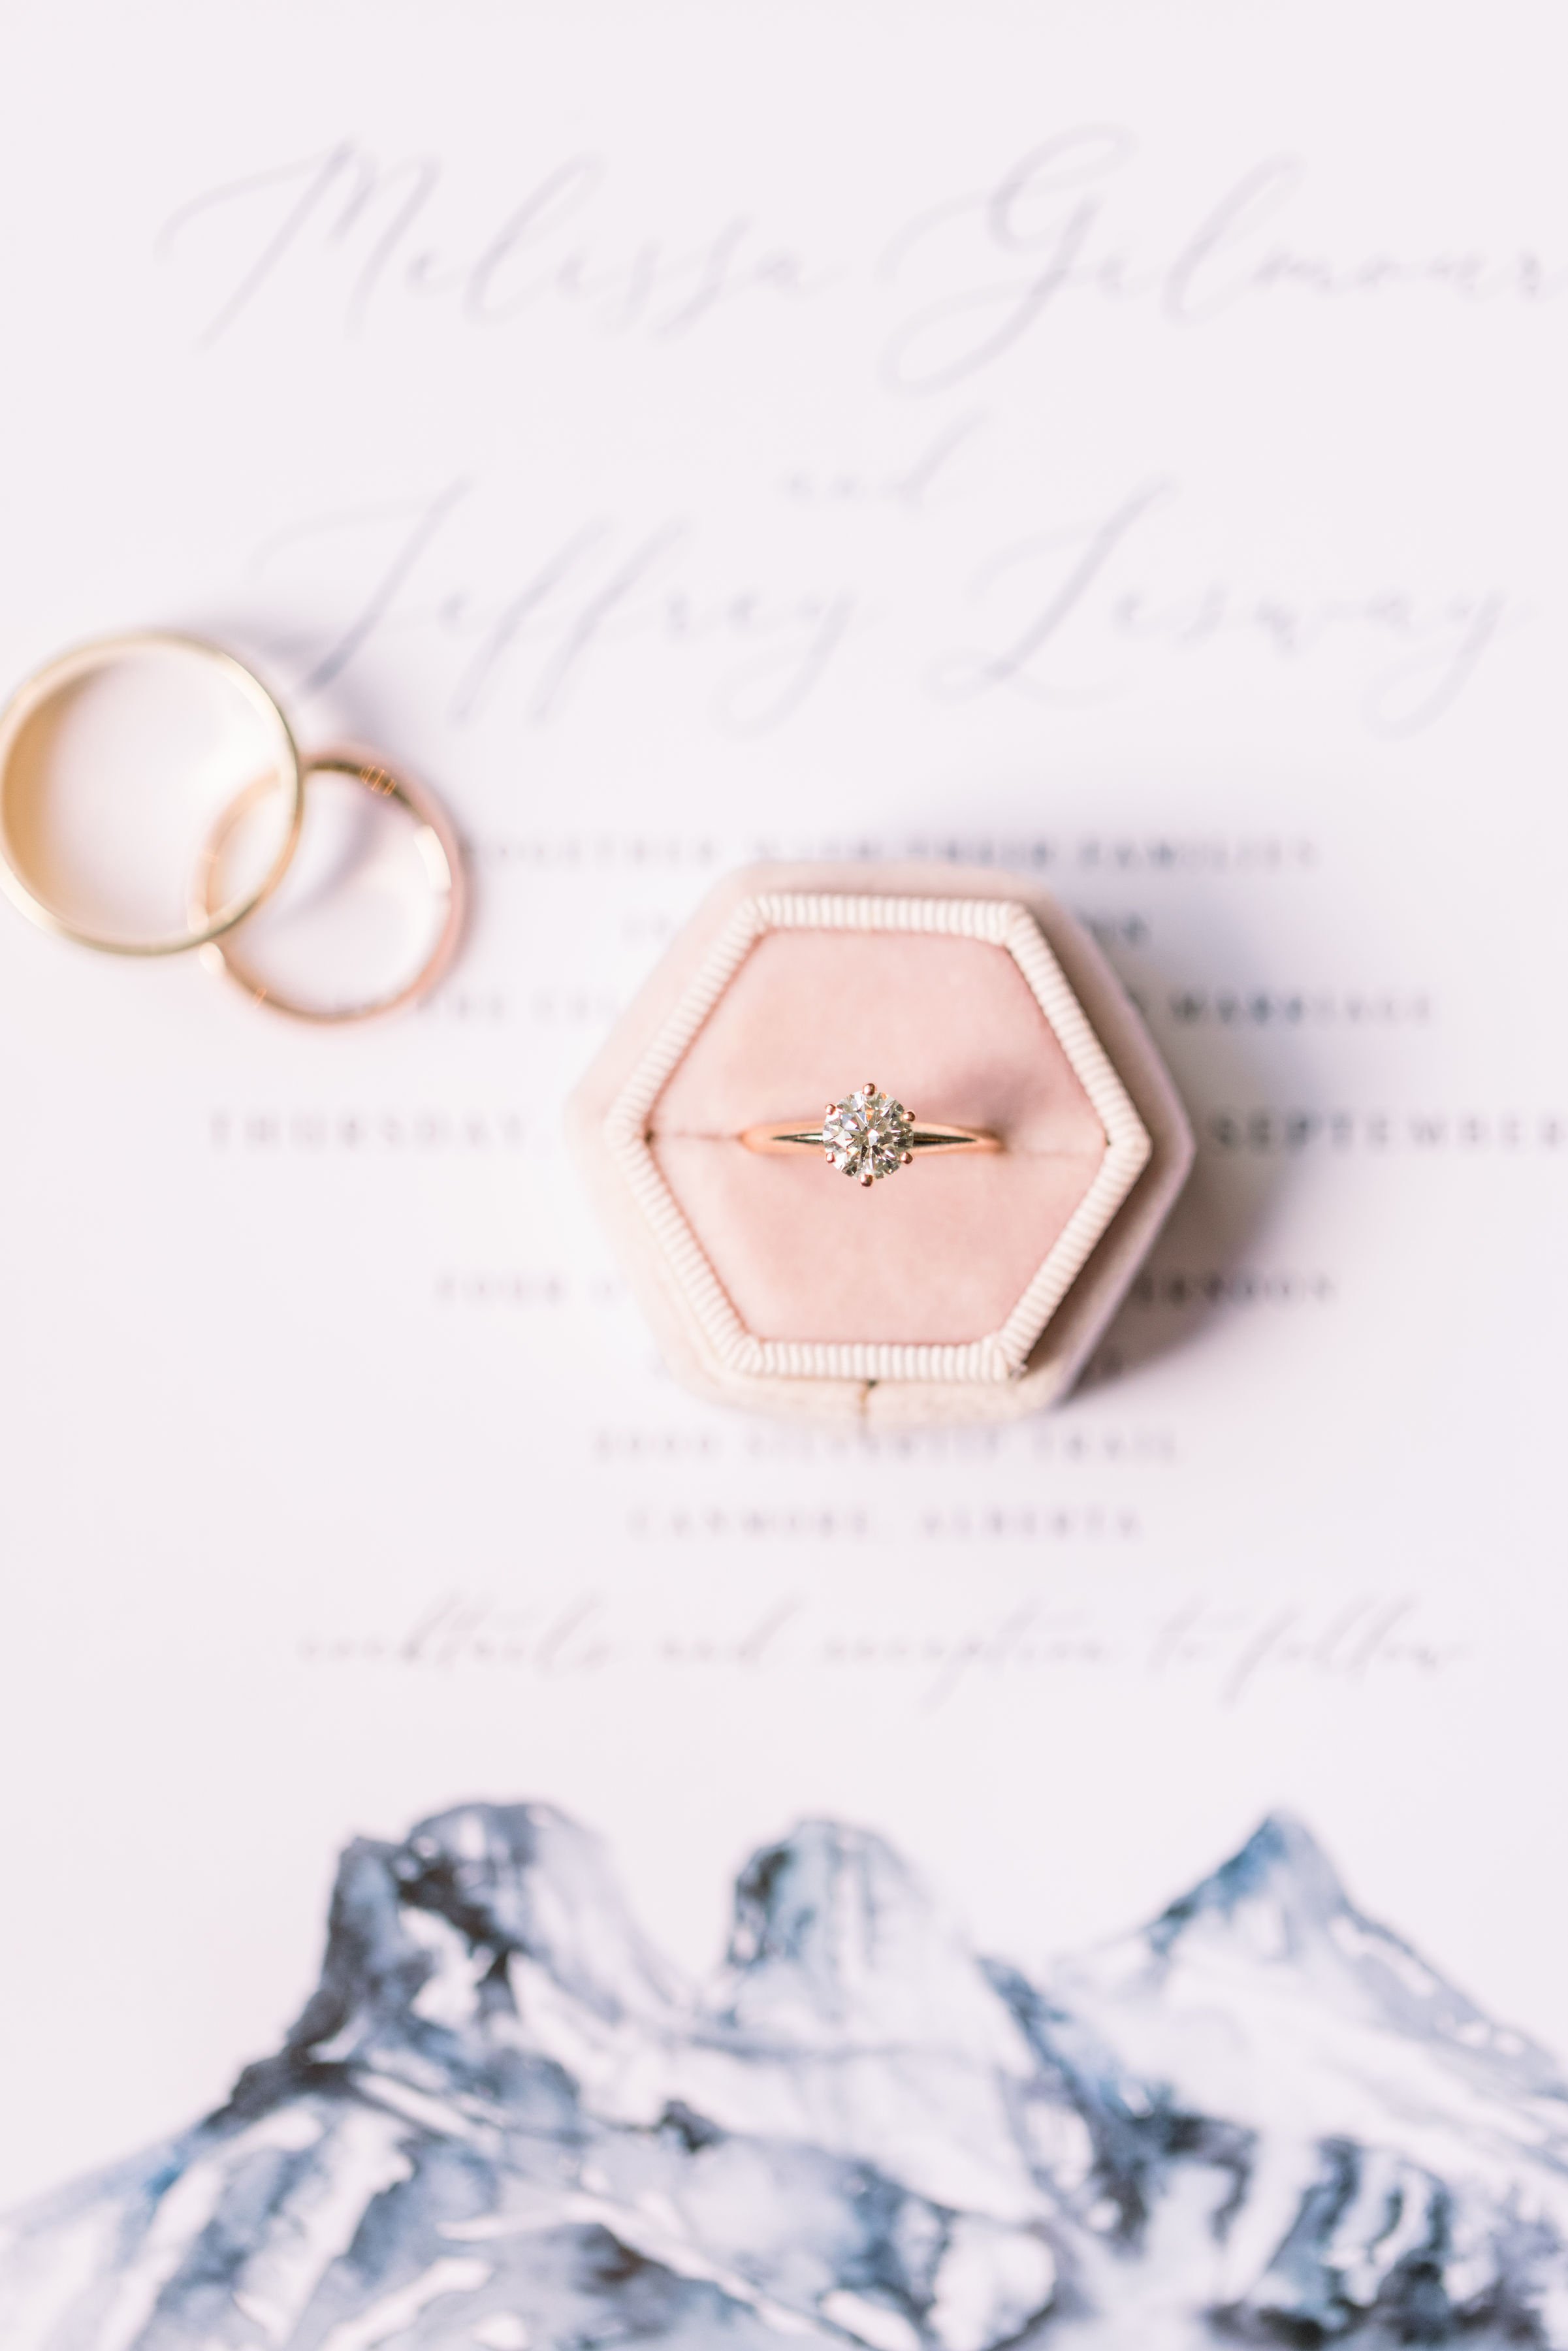  Flat-lay of a wedding ring in a pink box and wedding announcement with mountains by Chelsea Mason Photography. wedding ring #Albertaweddings #shesaidyes #Albertaweddingphotographers #SilvertipGolfCourse #ChelseaMasonPhotography #ChelseaMasonWeddings